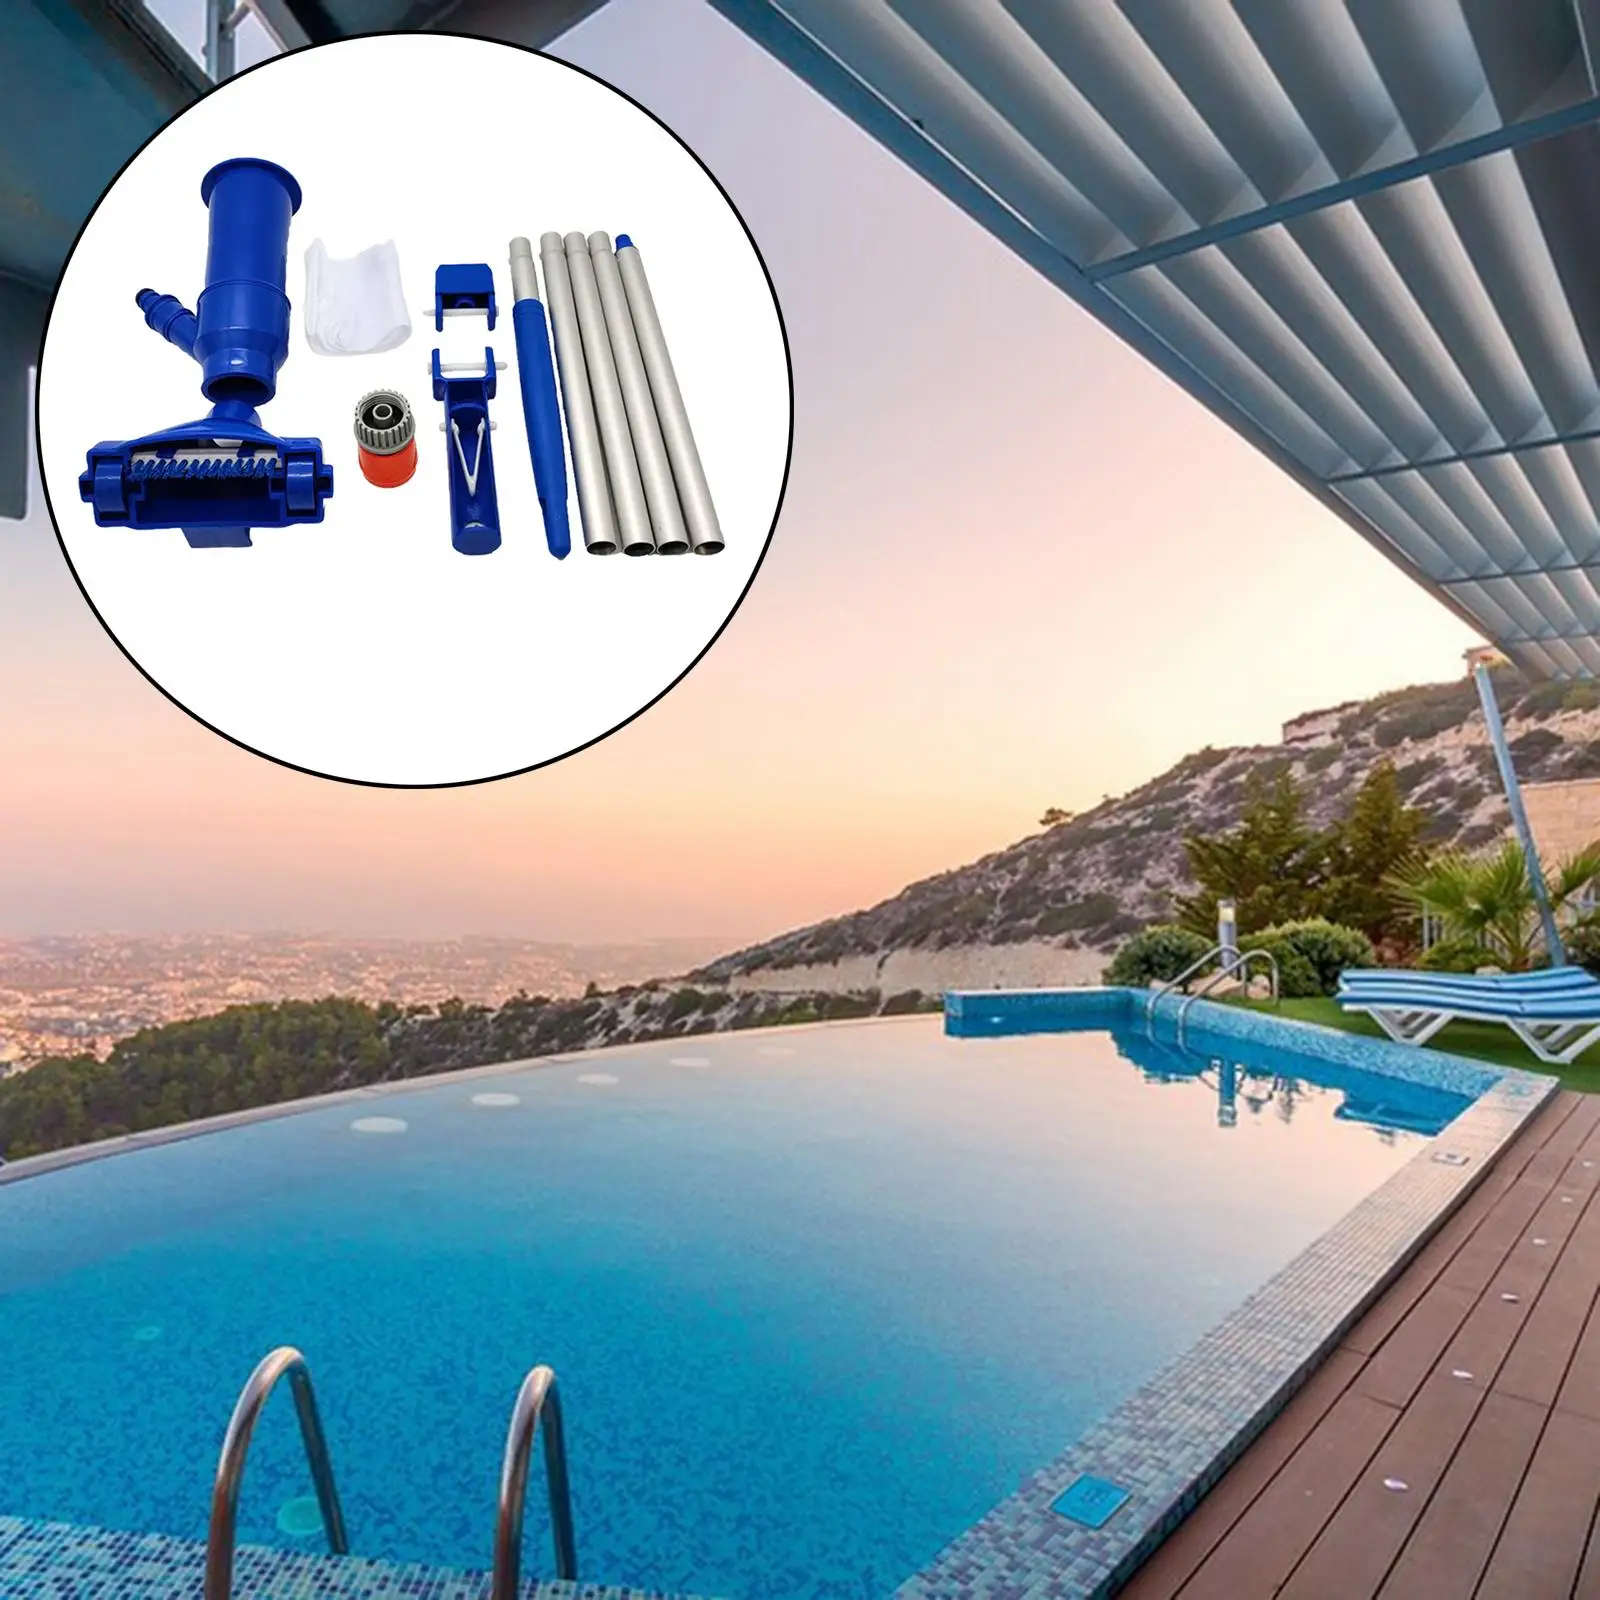 Swimming Pool Cleaner Kits Underwater 5 Section Pole Suction Vacuum Head for Spas Hot Tub Fountains Maintenance Cleaning Tool